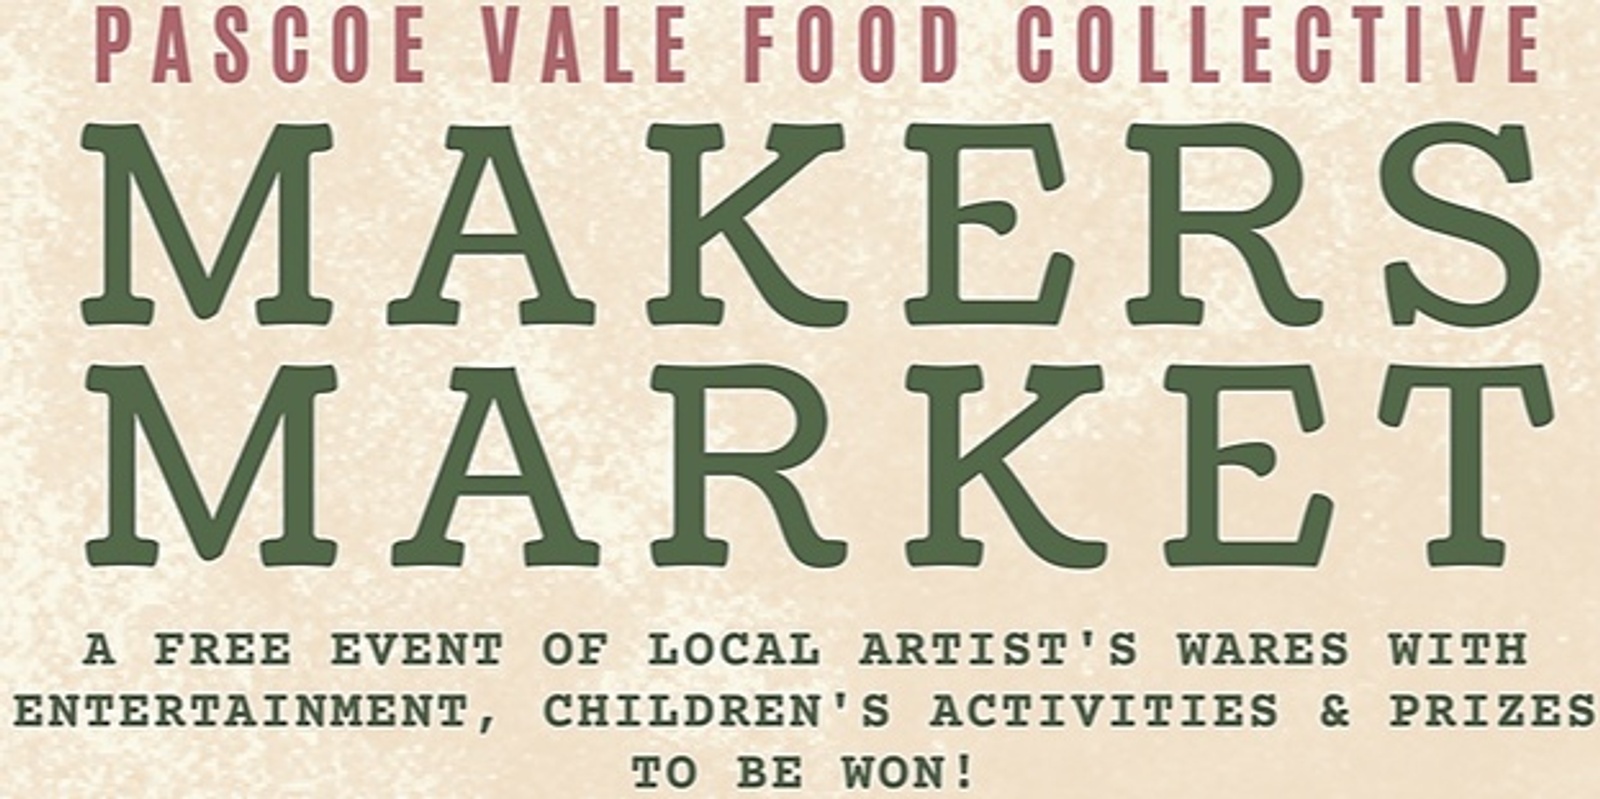 Banner image for Pascoe Vale Food Collective's Annual Maker's Market